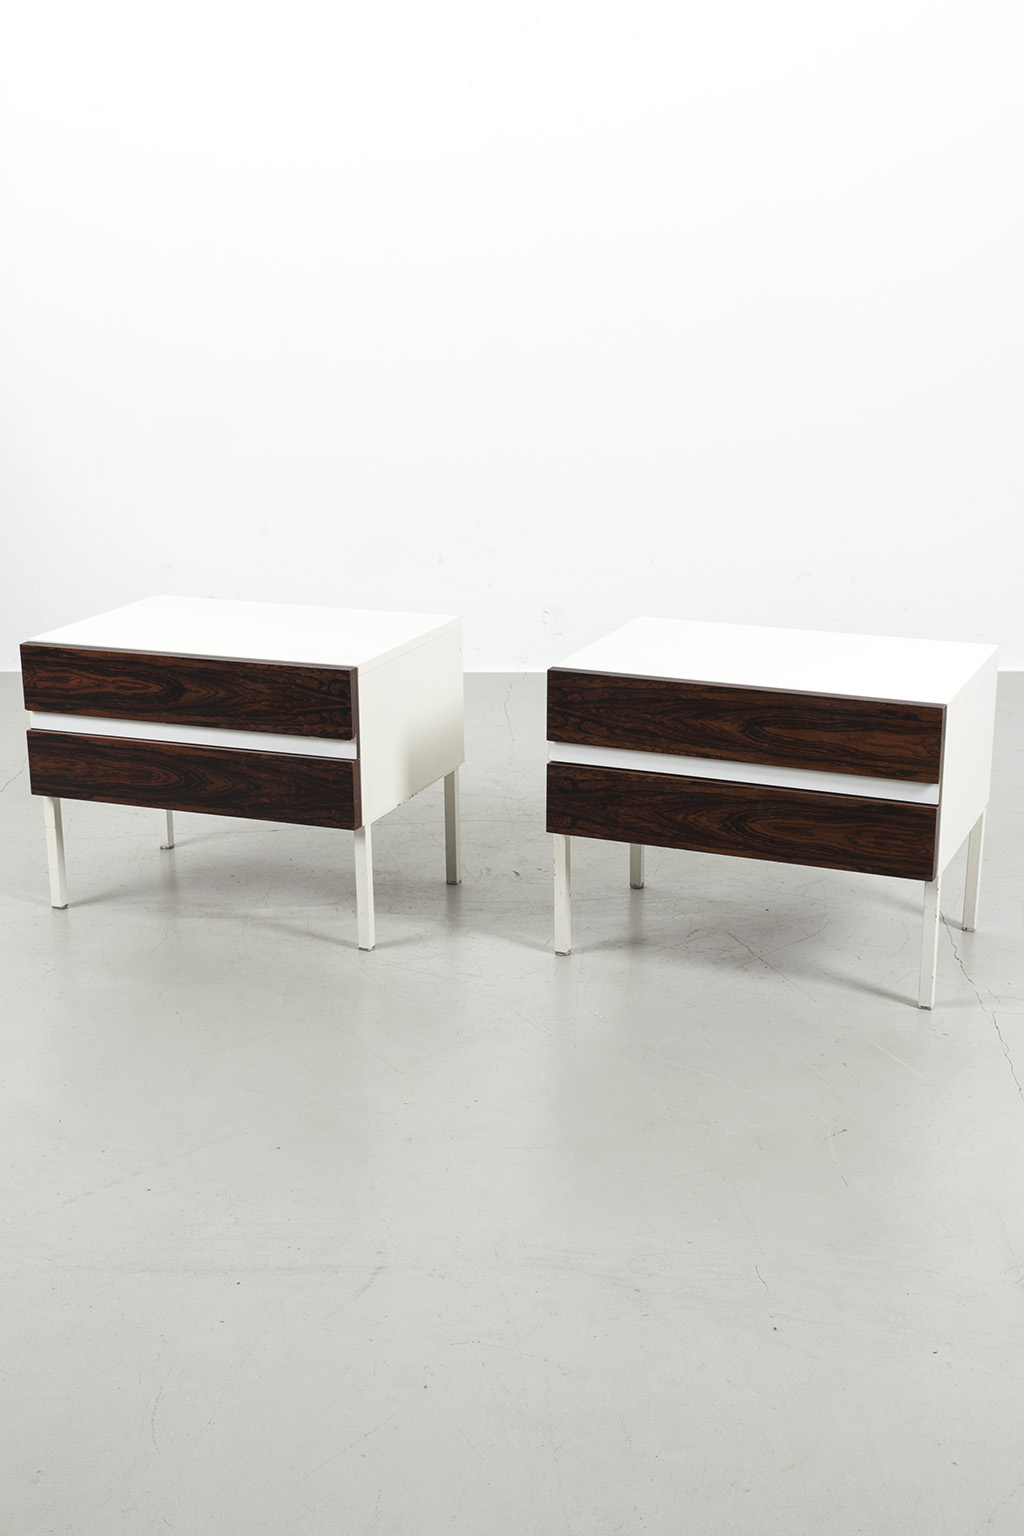 2 nightstands with rosewood front